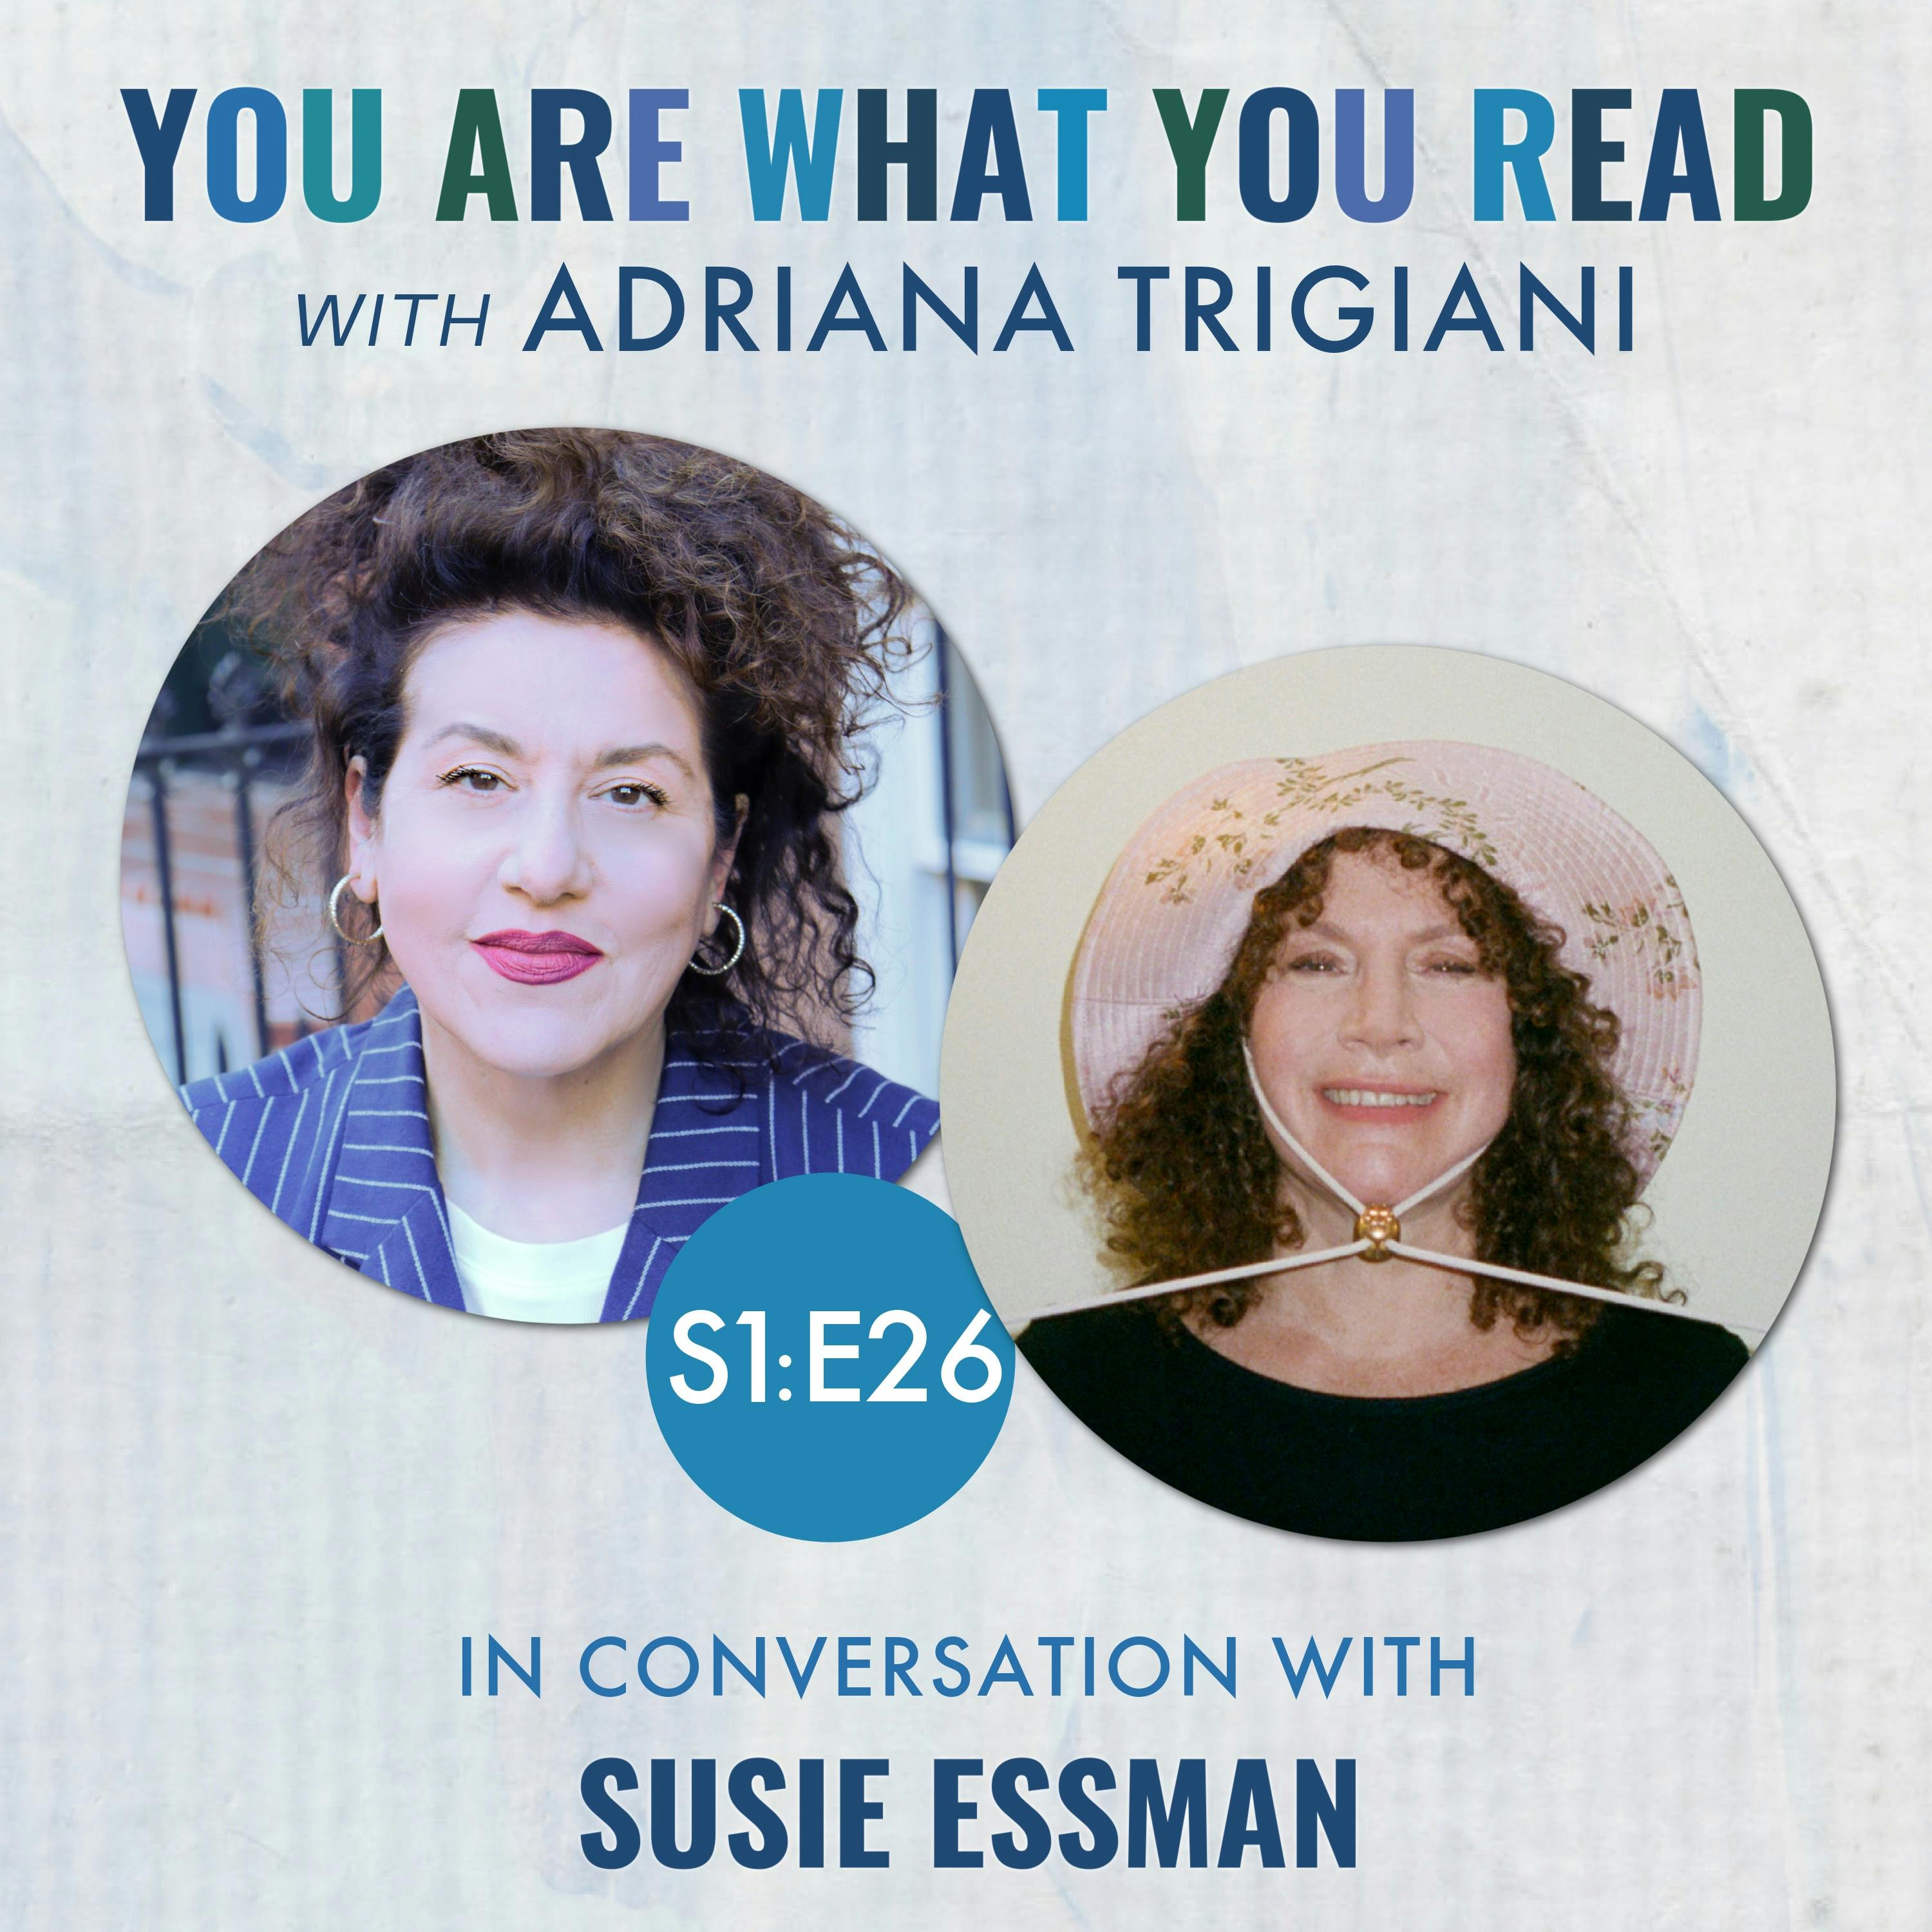 Susie Essman on books, friendships and the final season of ’Curb Your Enthusiasm’